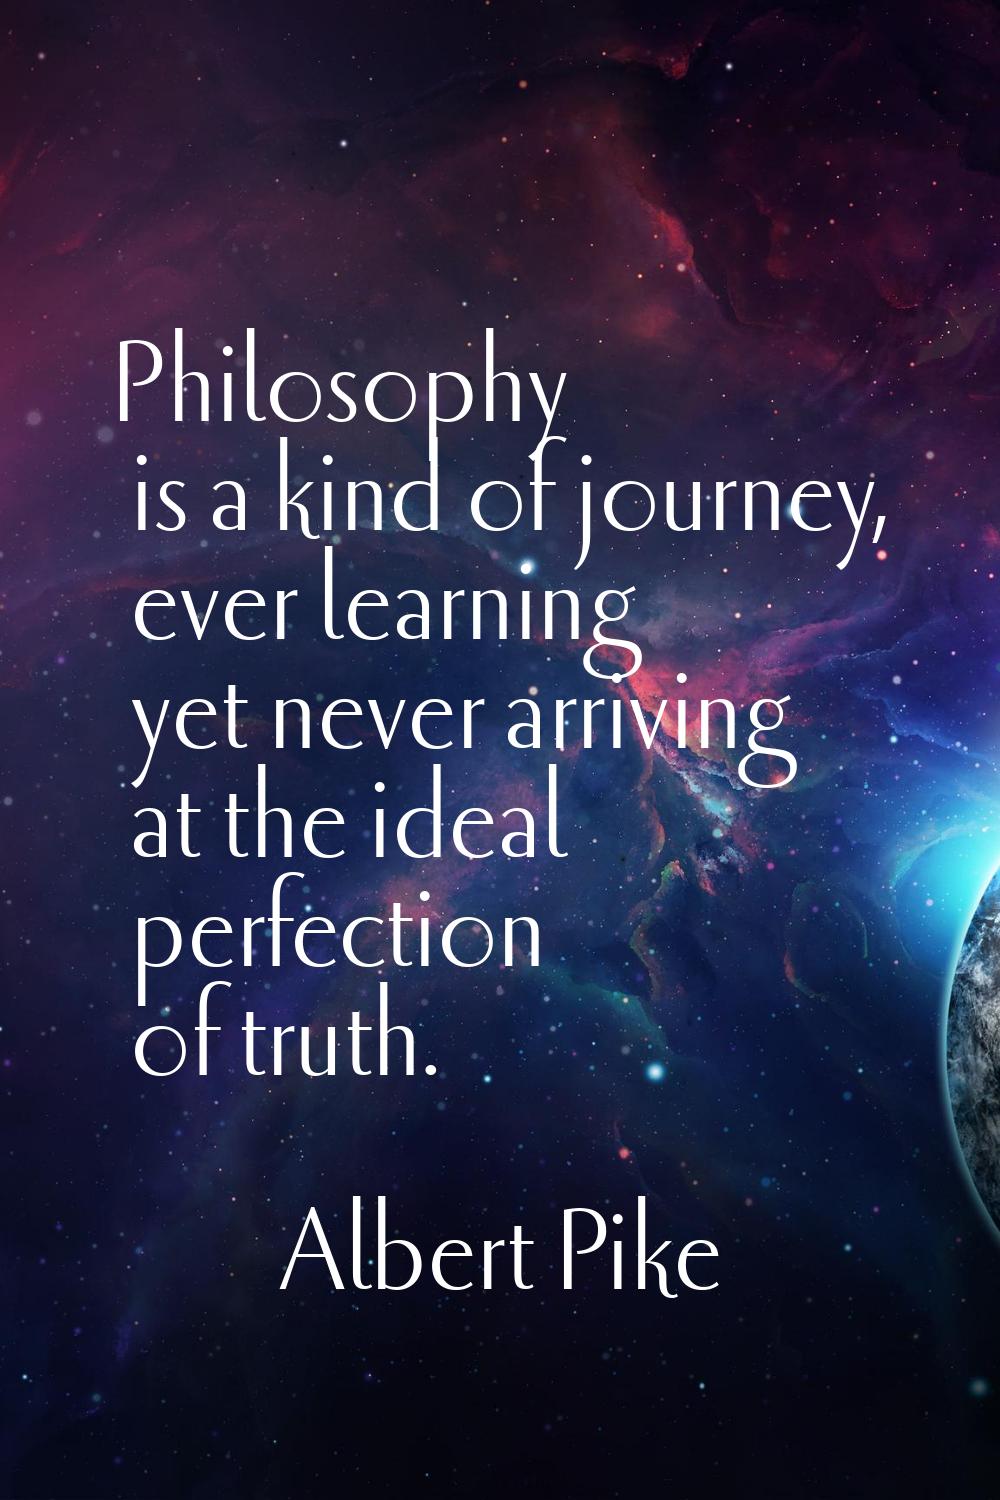 Philosophy is a kind of journey, ever learning yet never arriving at the ideal perfection of truth.